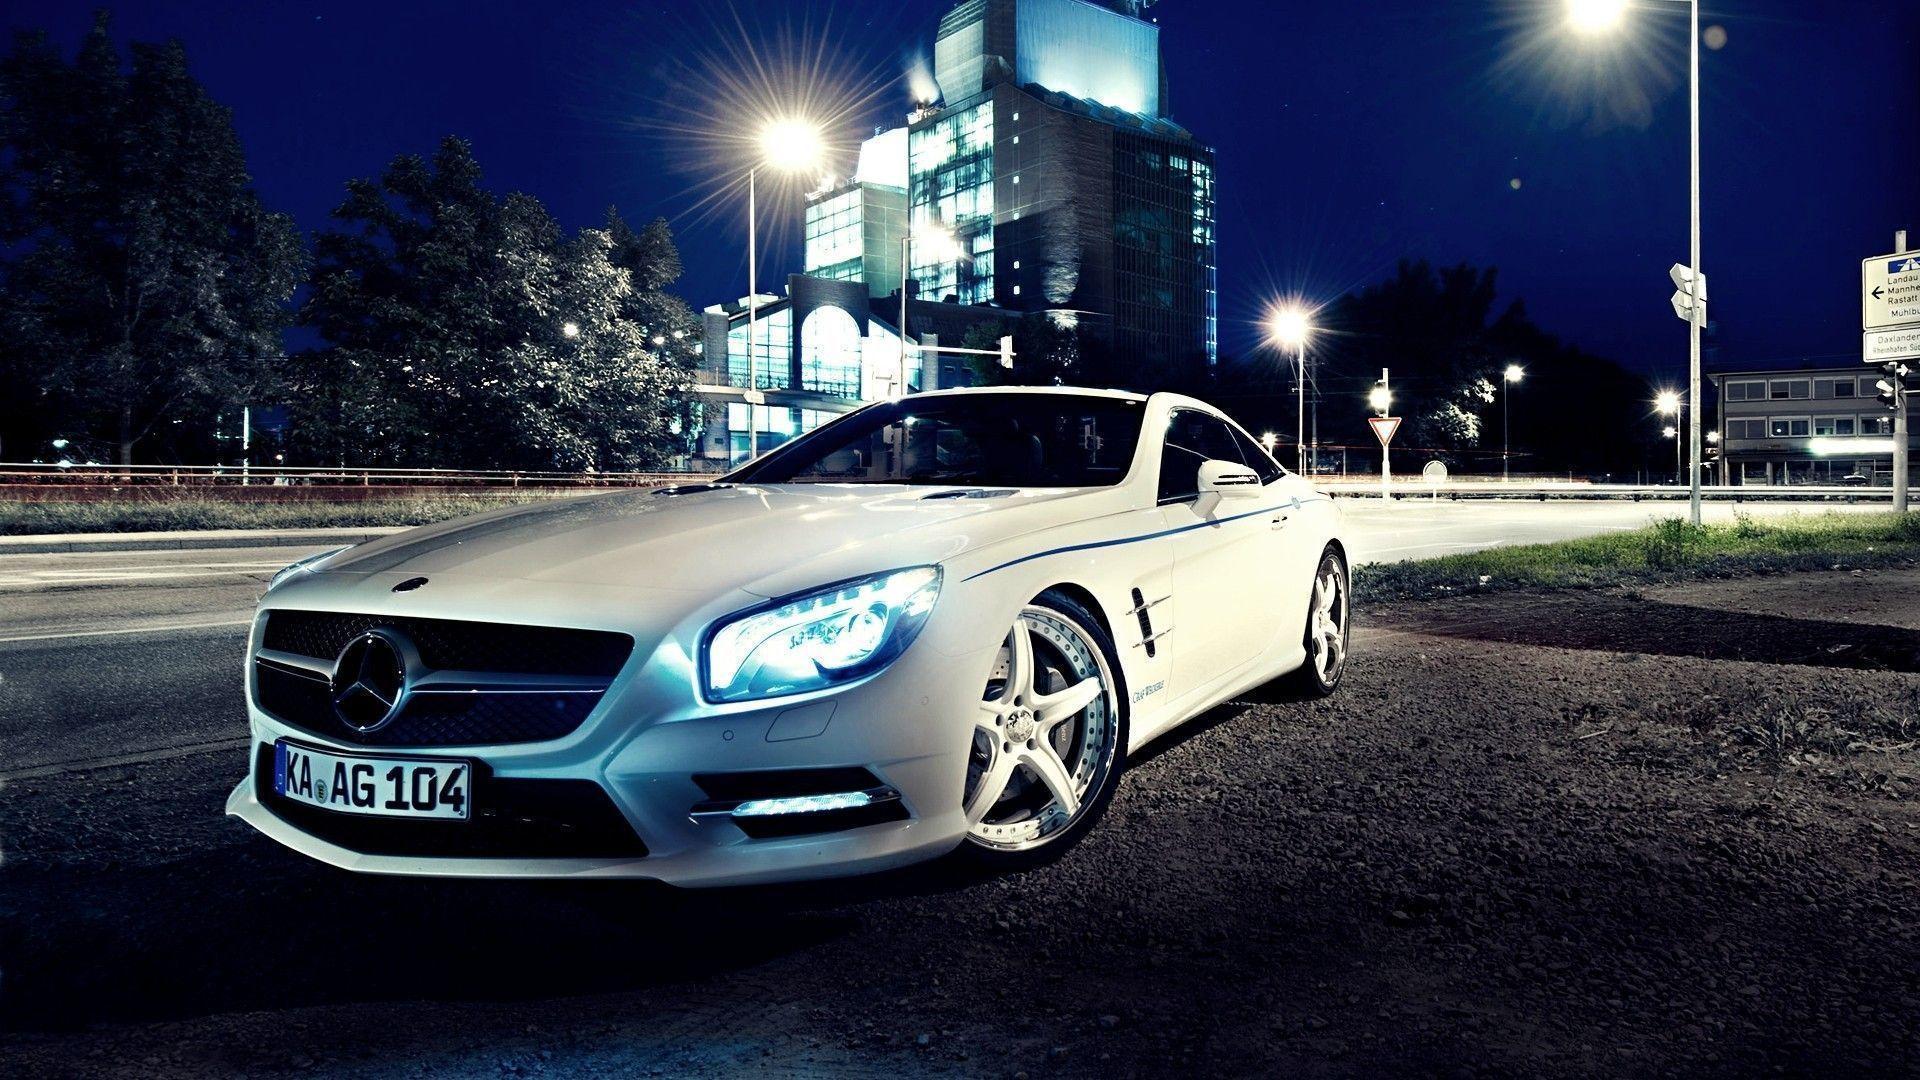 Mercedes Benz SL65 AMG White Wallpaper Wide Or HD